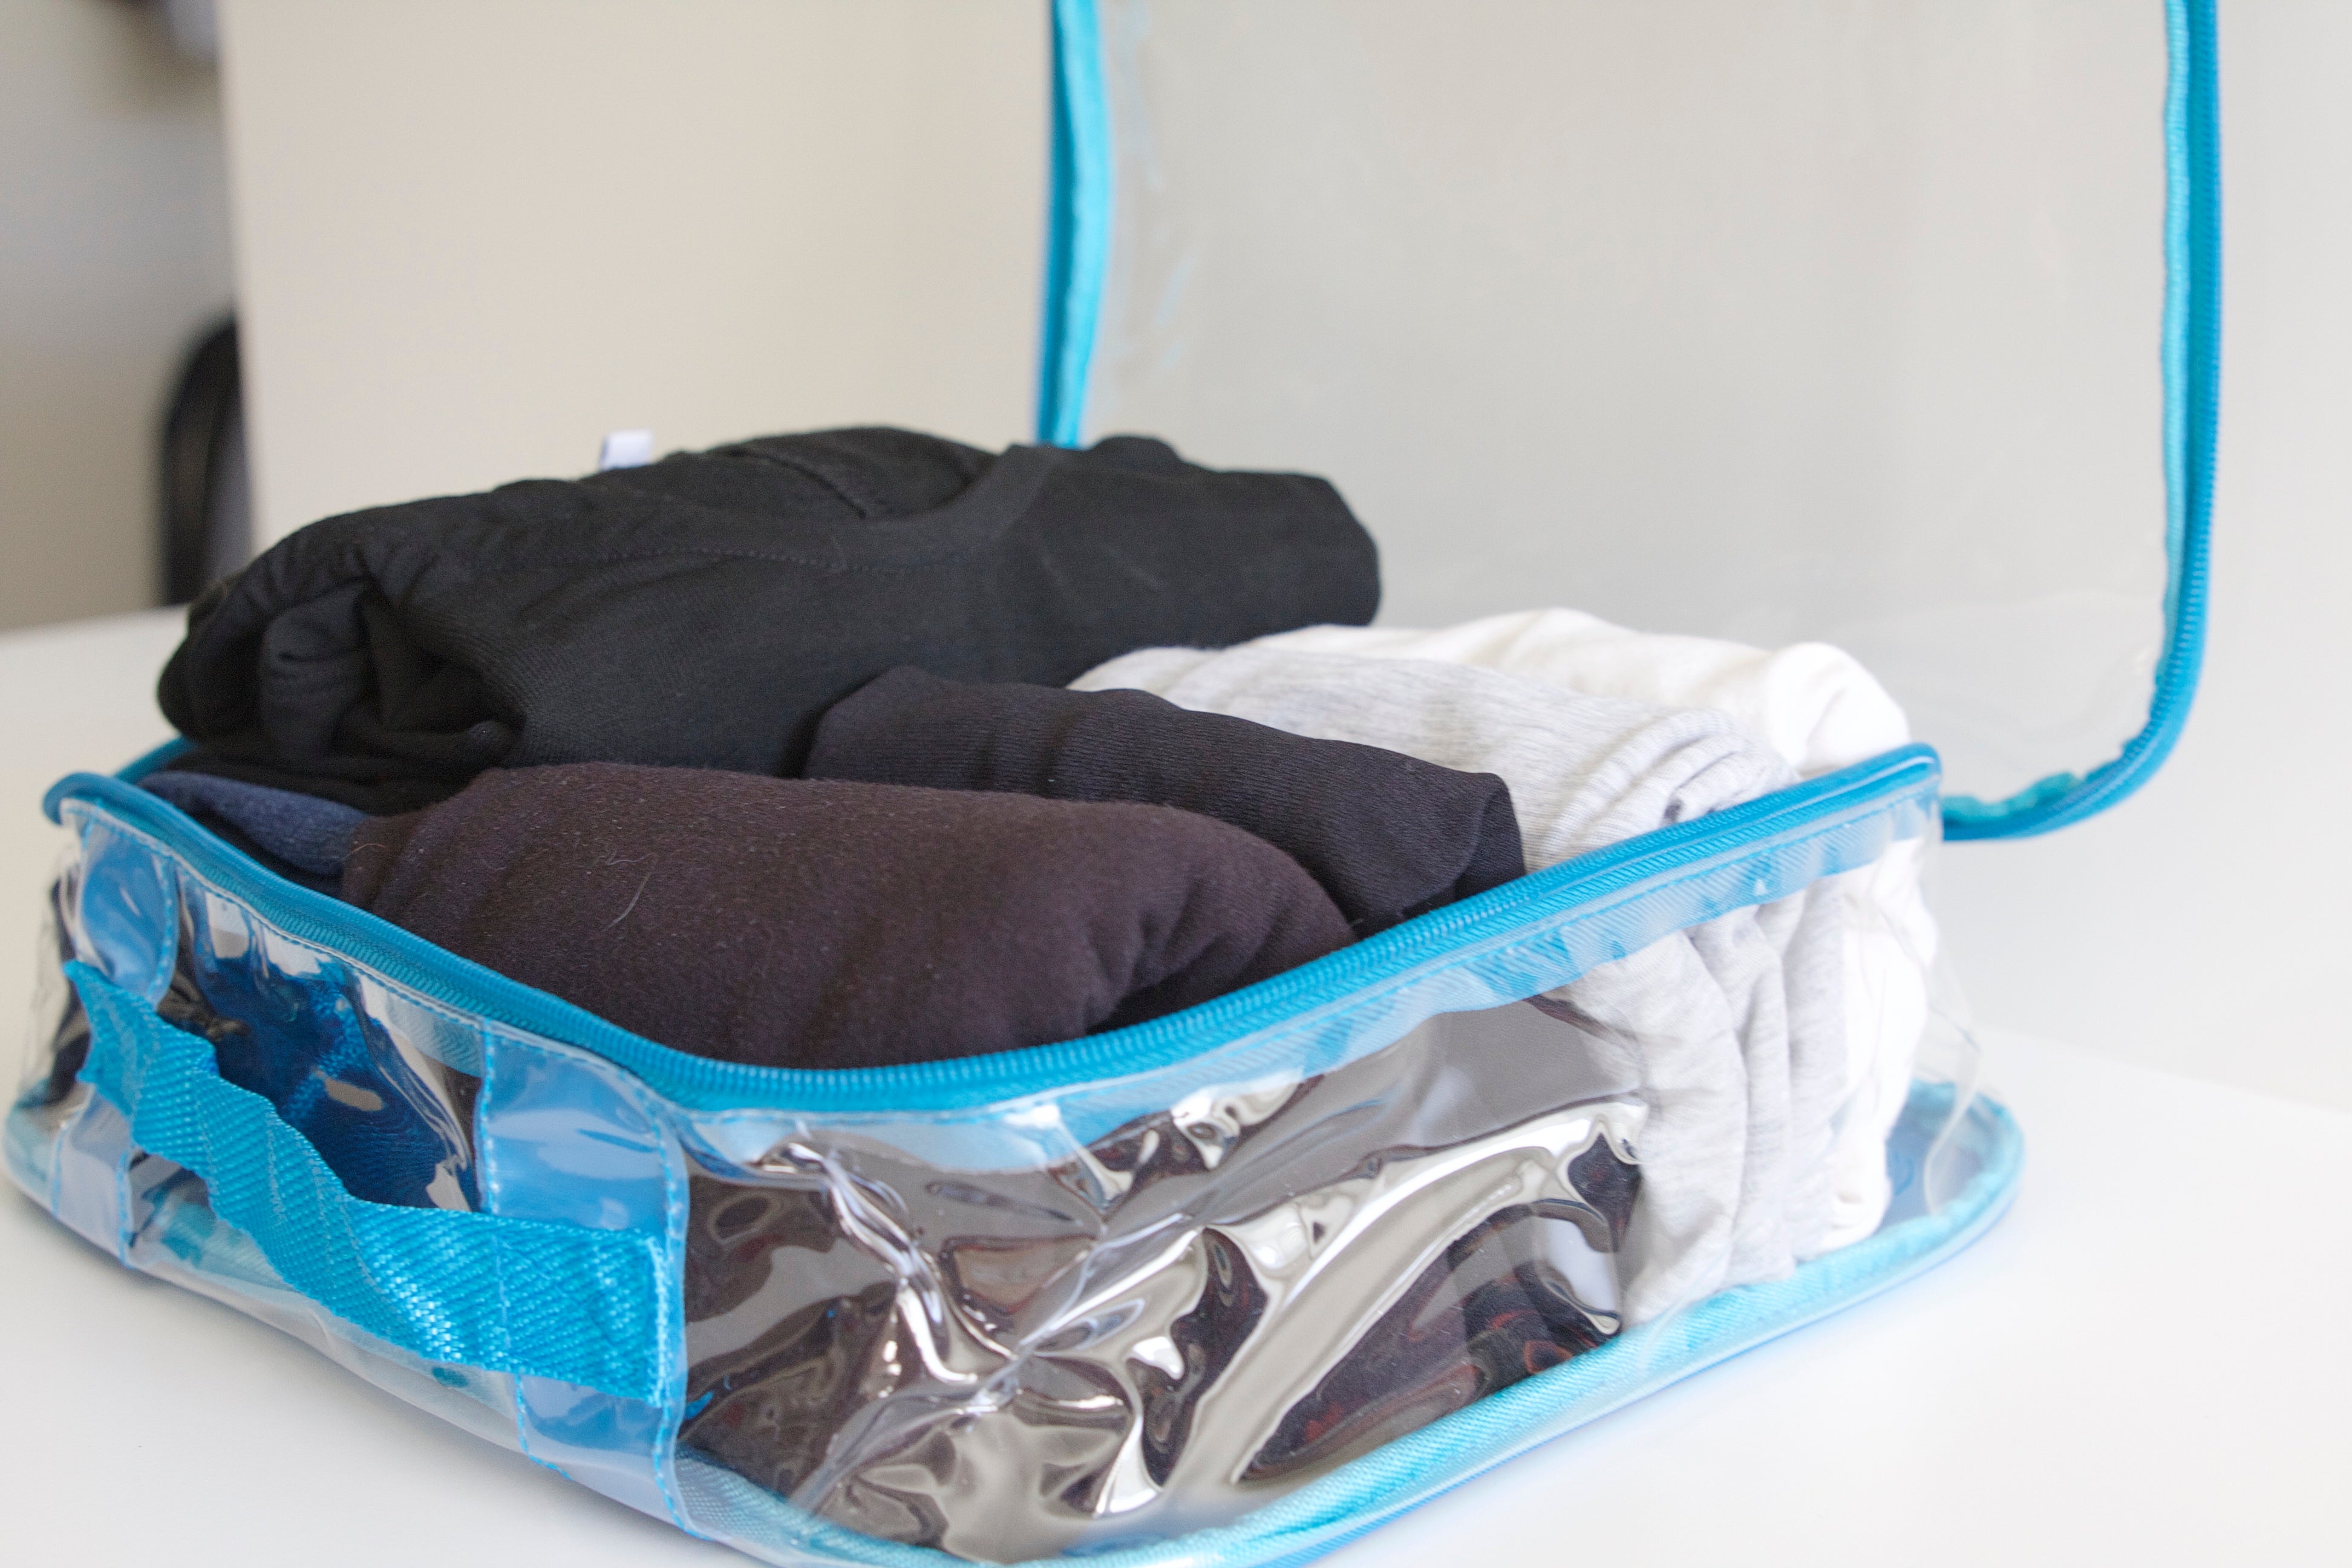 Rolled clothes inside packing cube